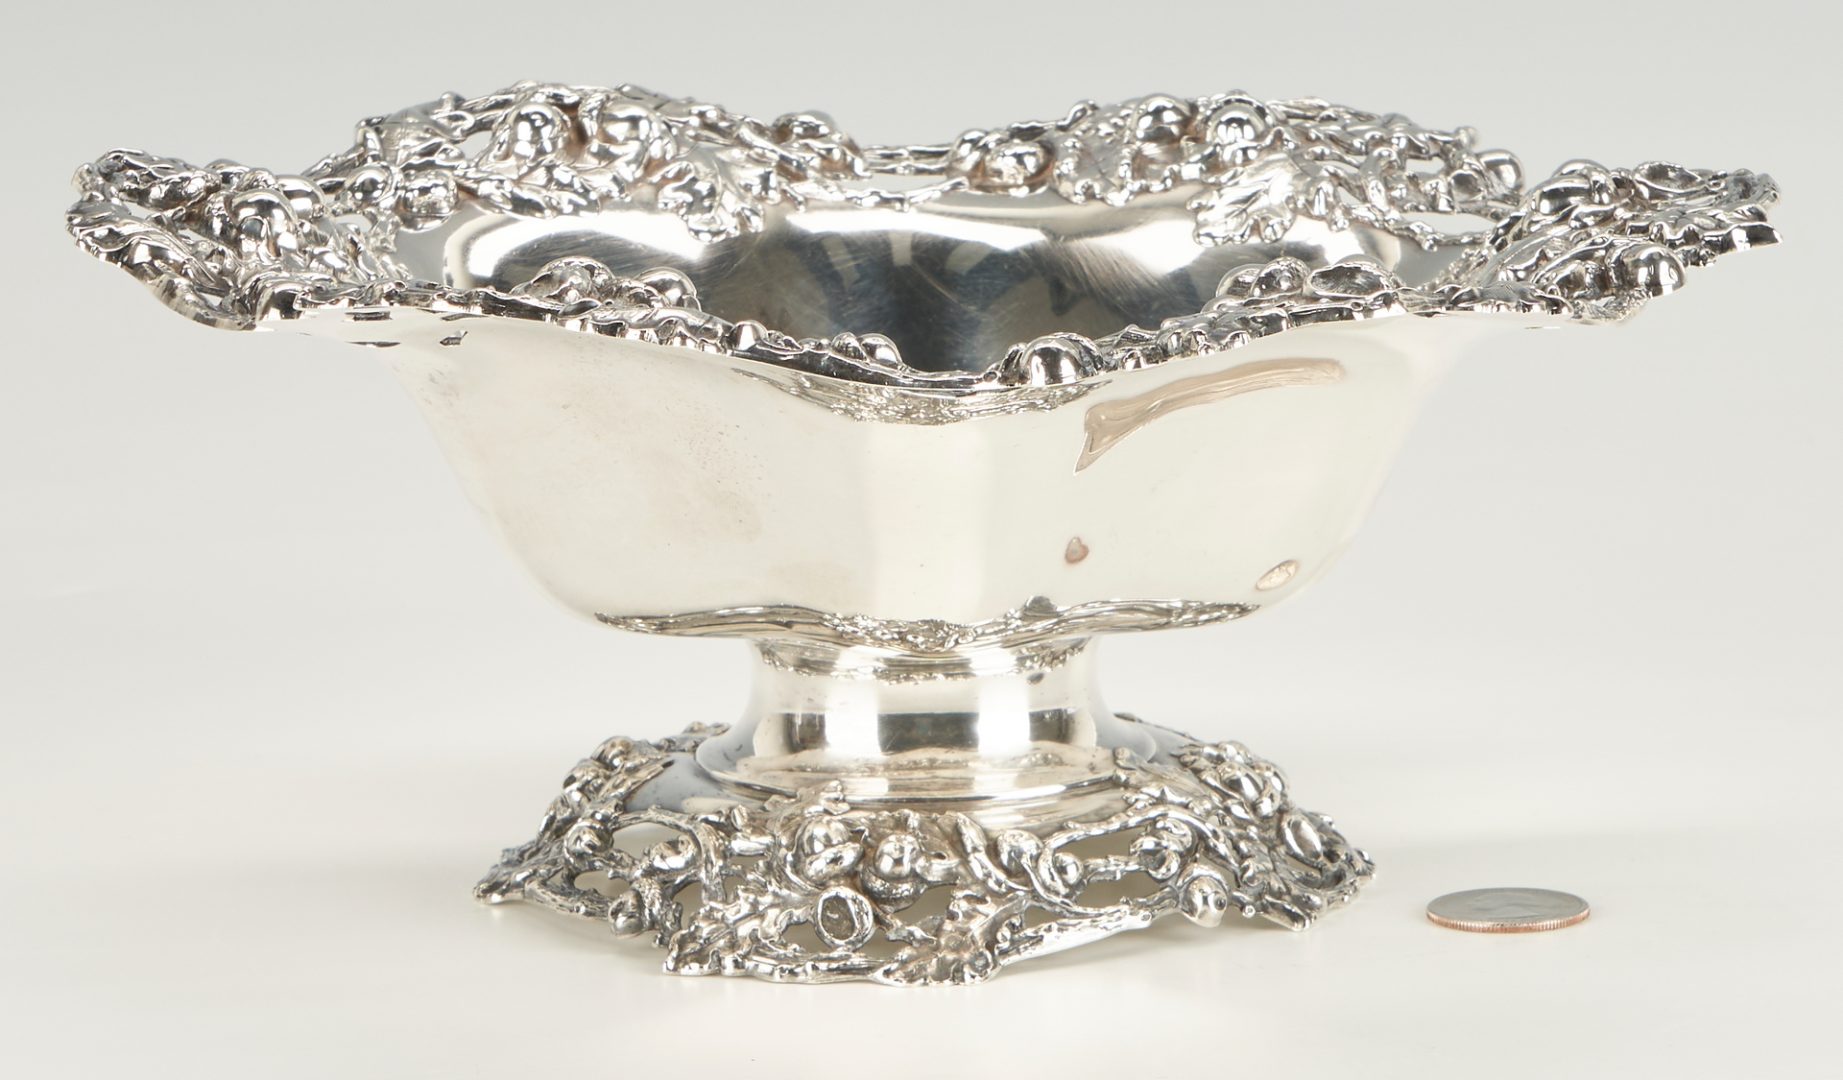 Lot 1248: Art Nouveau Sterling Silver Footed Bowl, Woodside